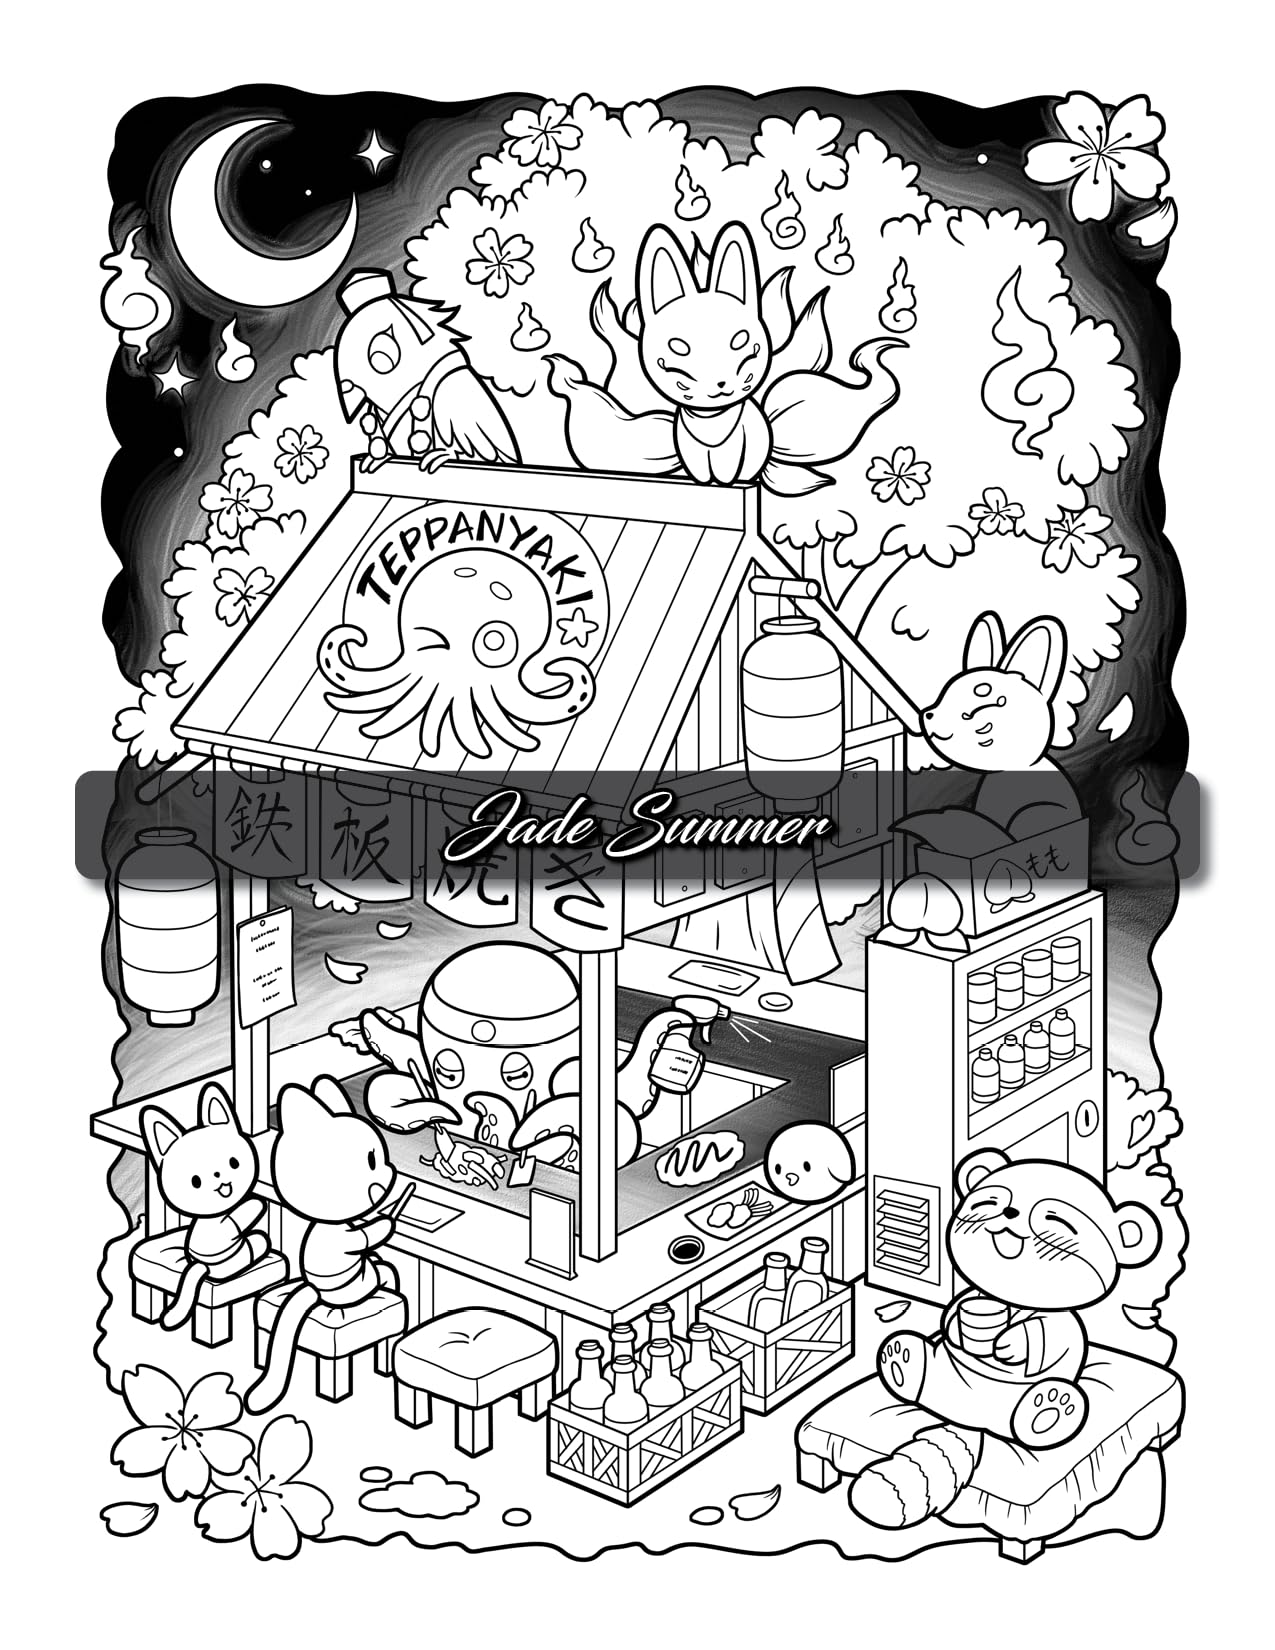 Kawaii Town: Coloring Book with Cute Animals, Tiny Buildings, and Playful Scenes for Stress Relief and Relaxation